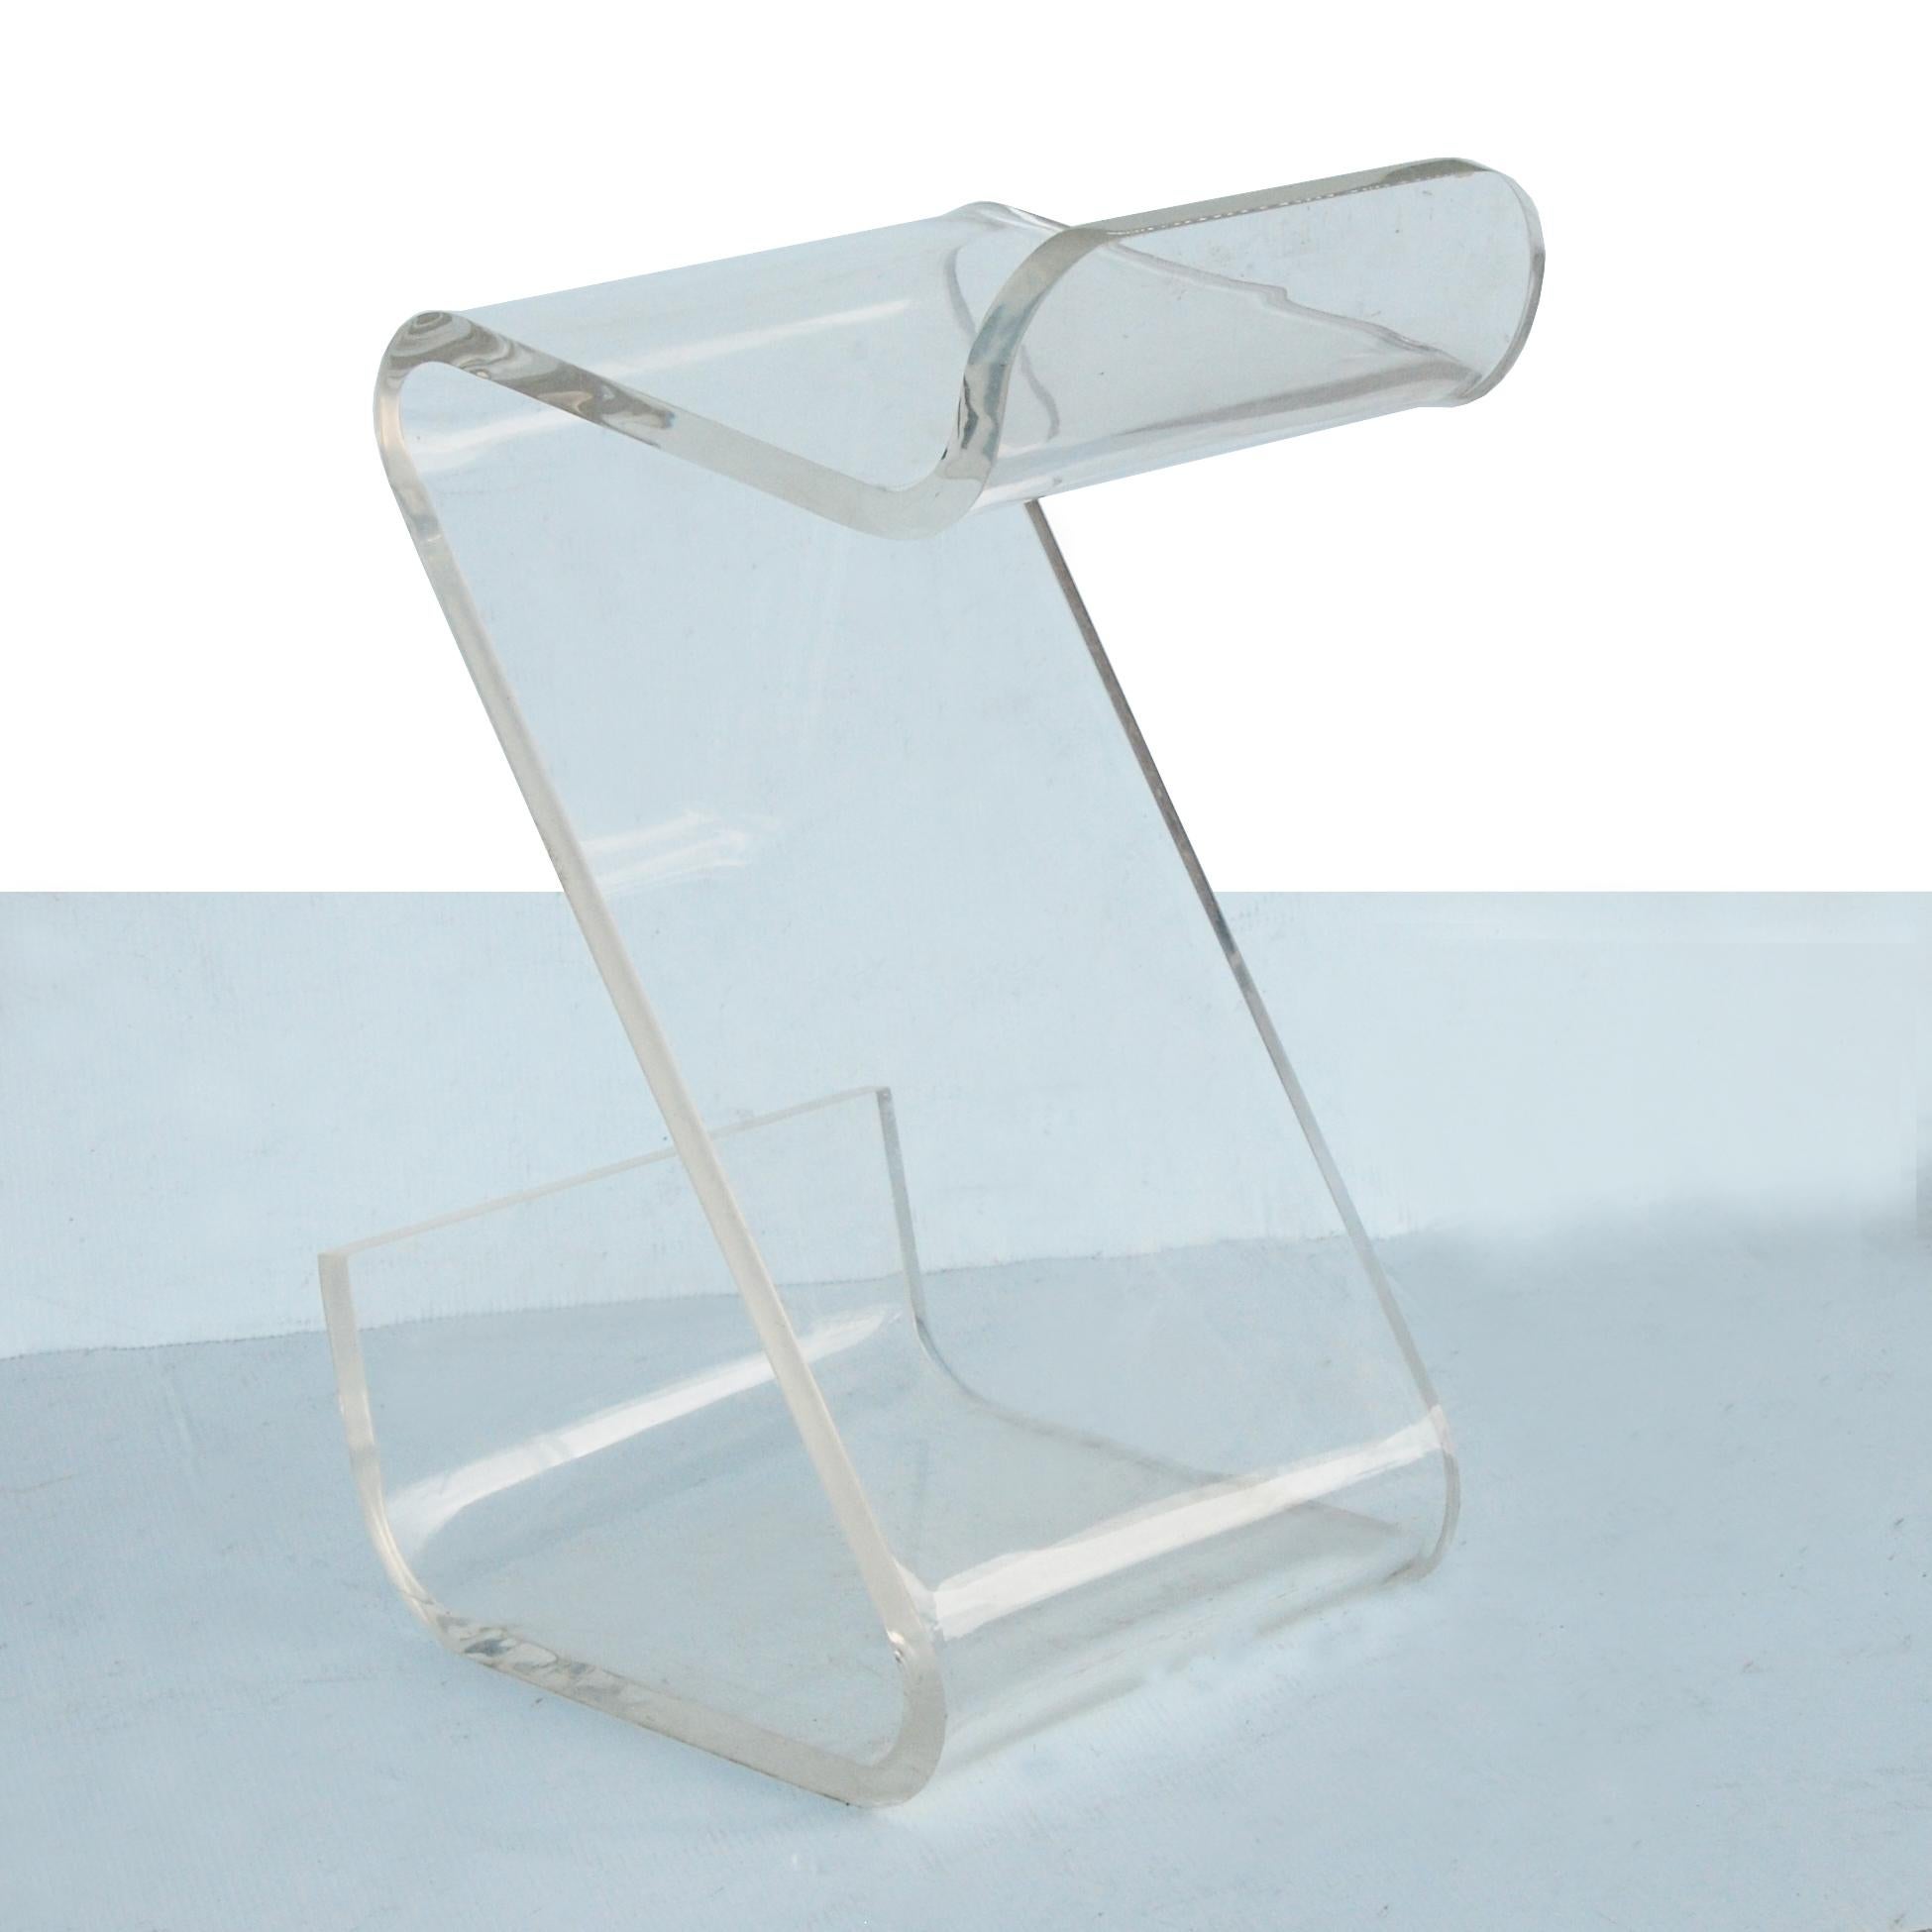 Pair of Haziza lucite stools

Modern and simple curves in lucite in the manner of Haziza.
 

 
 

 
  